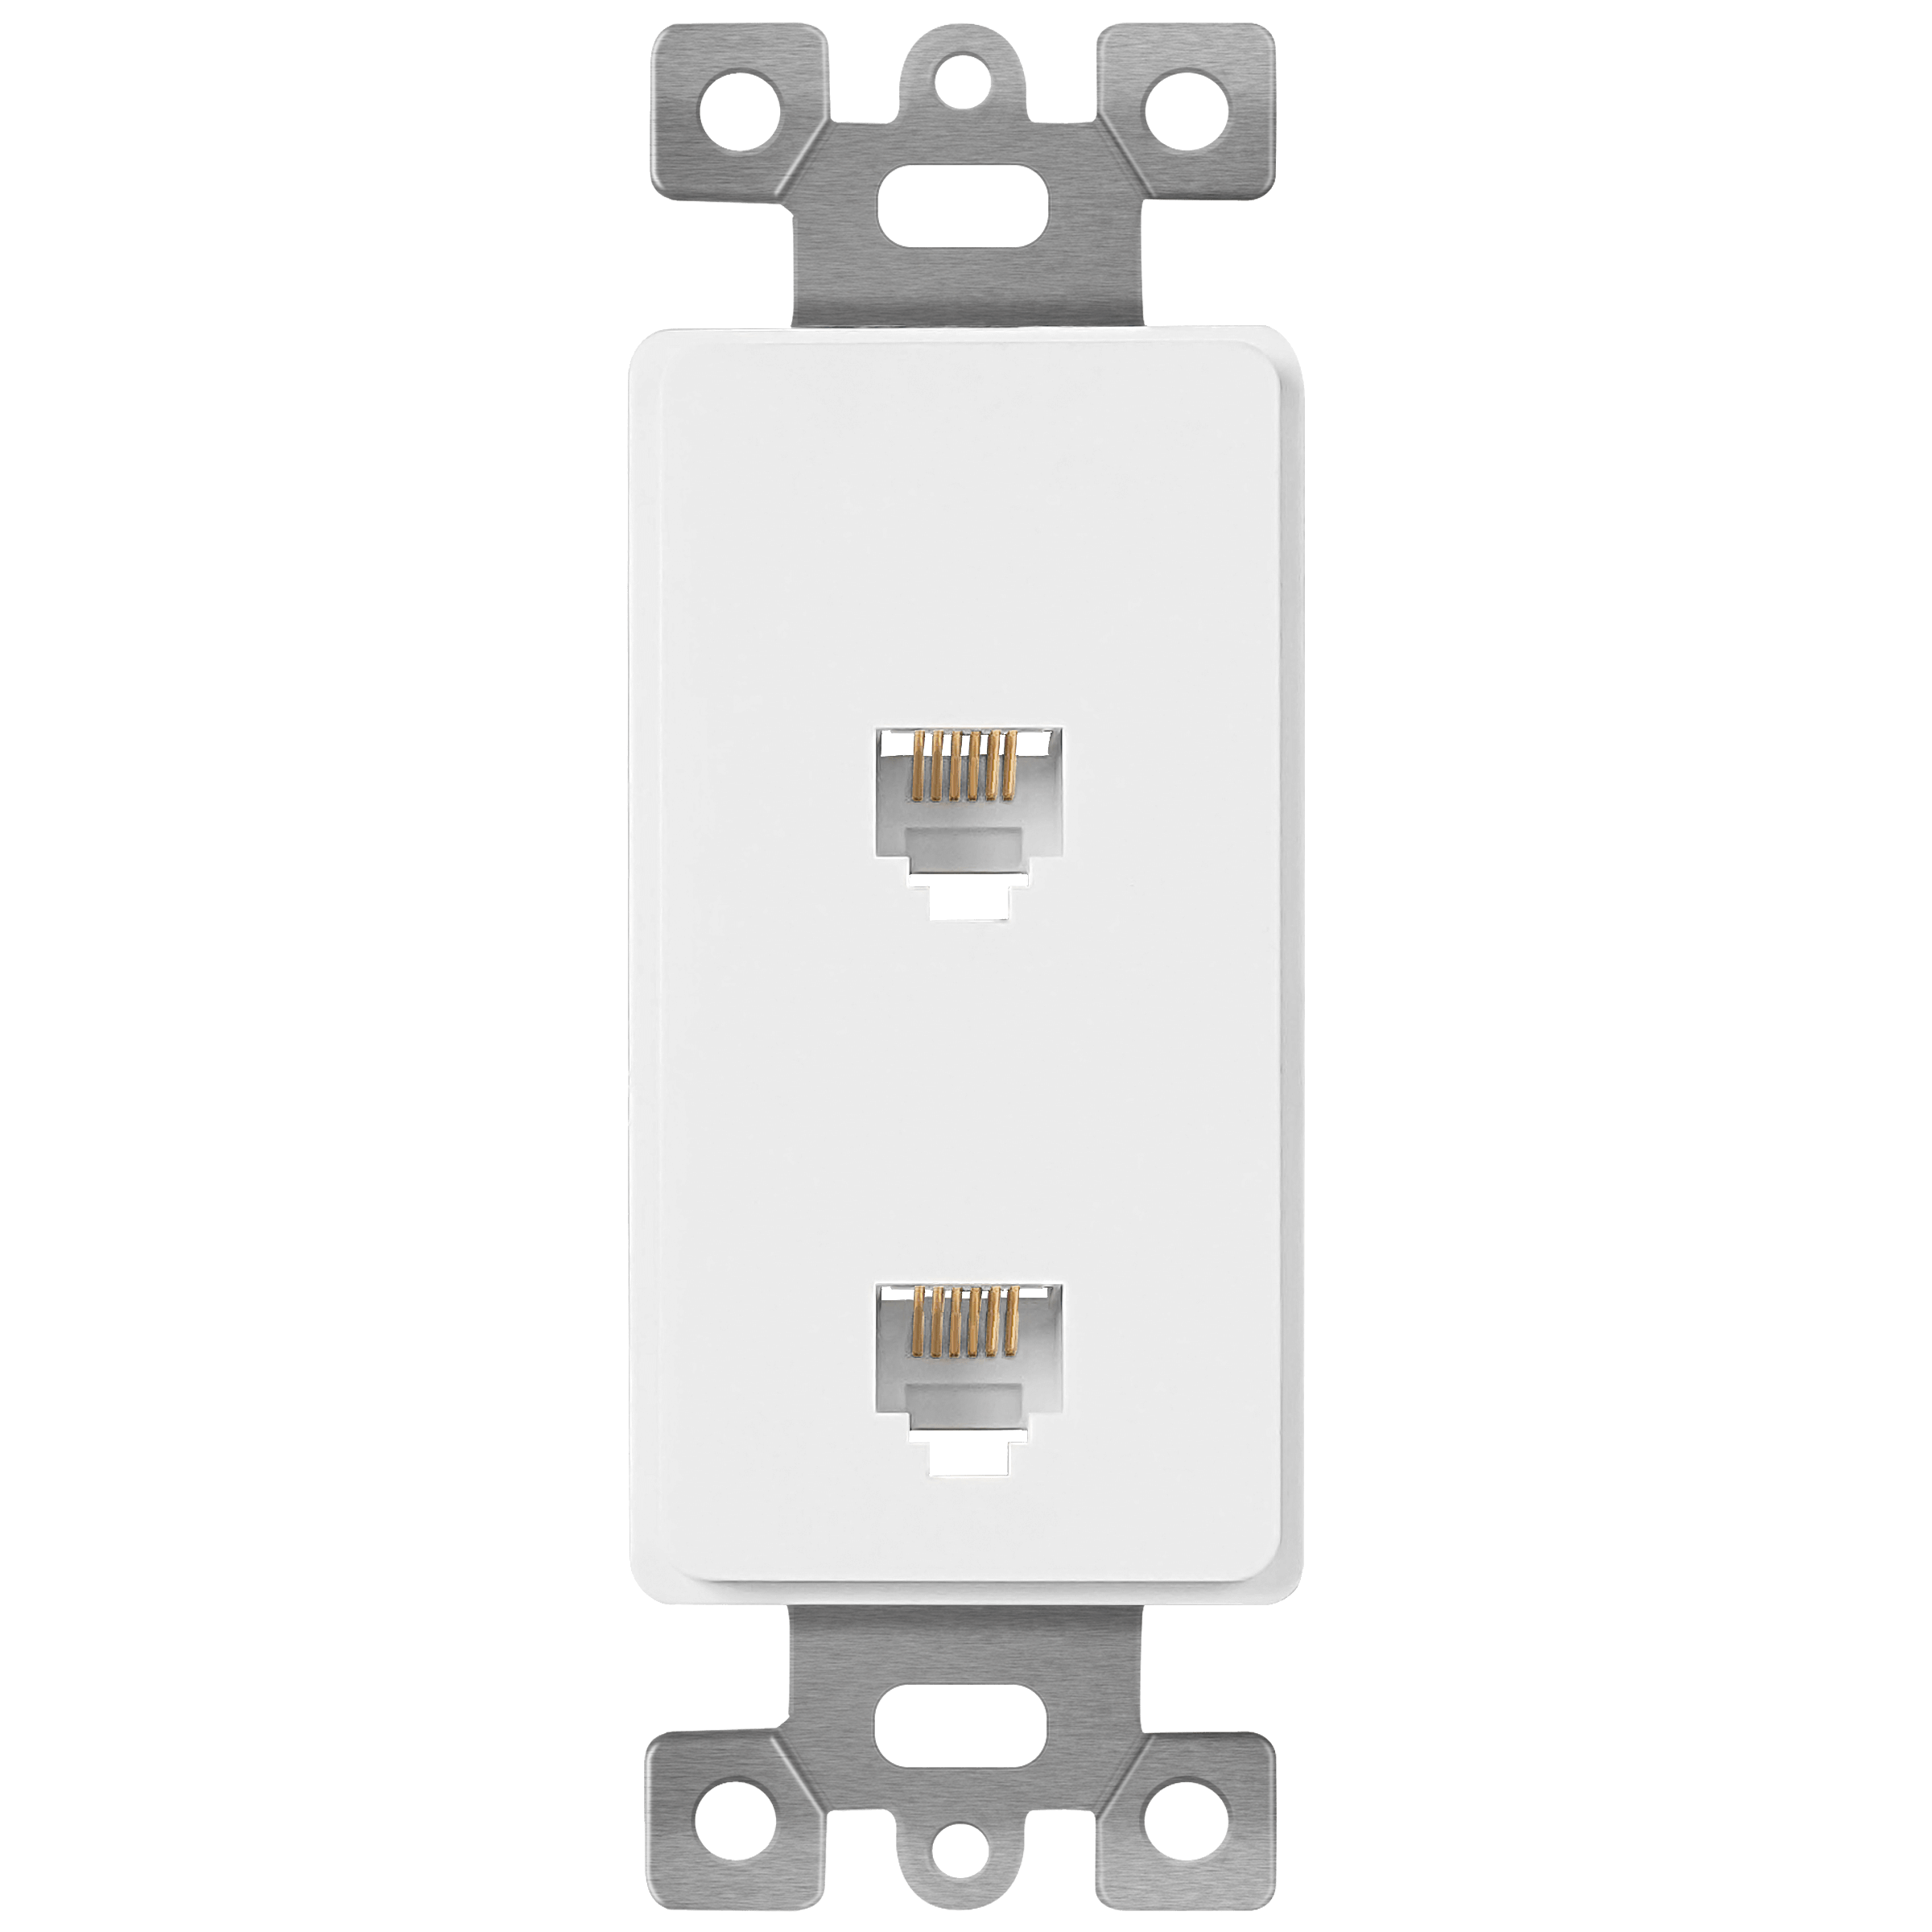 Dual RJ11 Jack Adapter Insert for Decorator Wall Plate